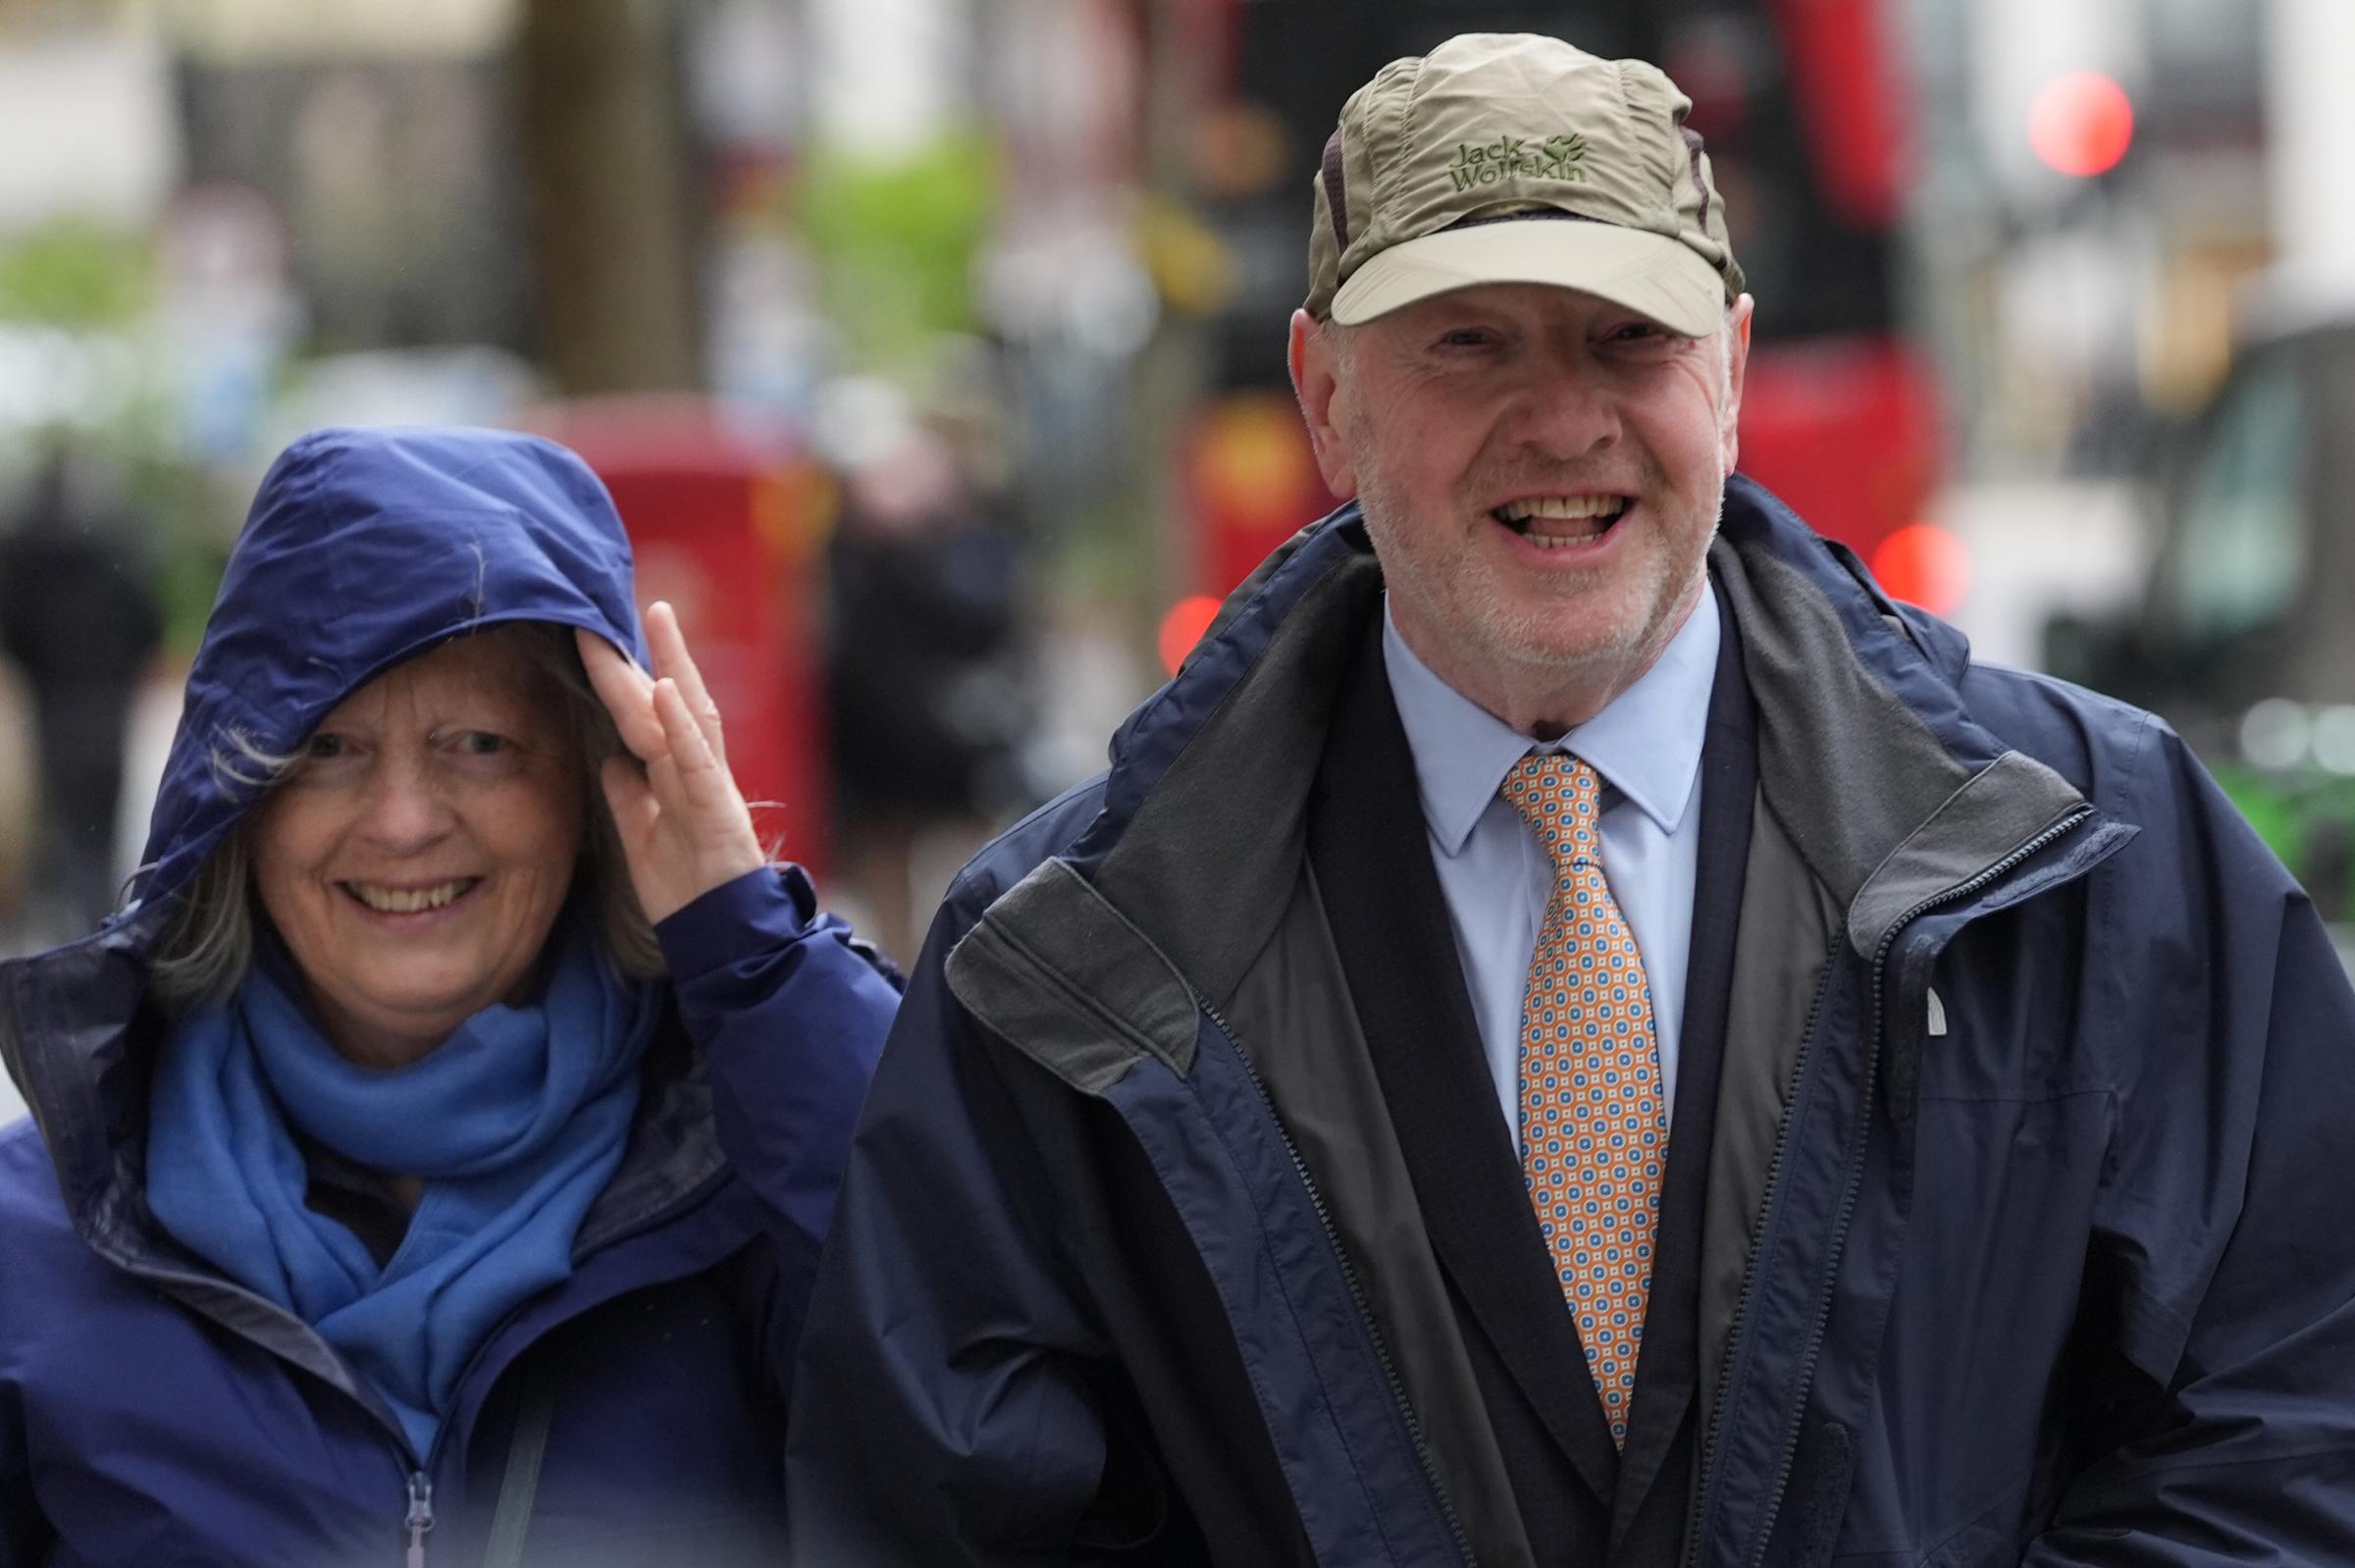 Former subpostmaster and lead campaigner Alan Bates, accompanied by his wife Suzanne Sercombe, arrives at Aldwych House, central London, to give evidence to Post Office Horizon IT inquiry. Image: Stefan Rousseau/PA Wire